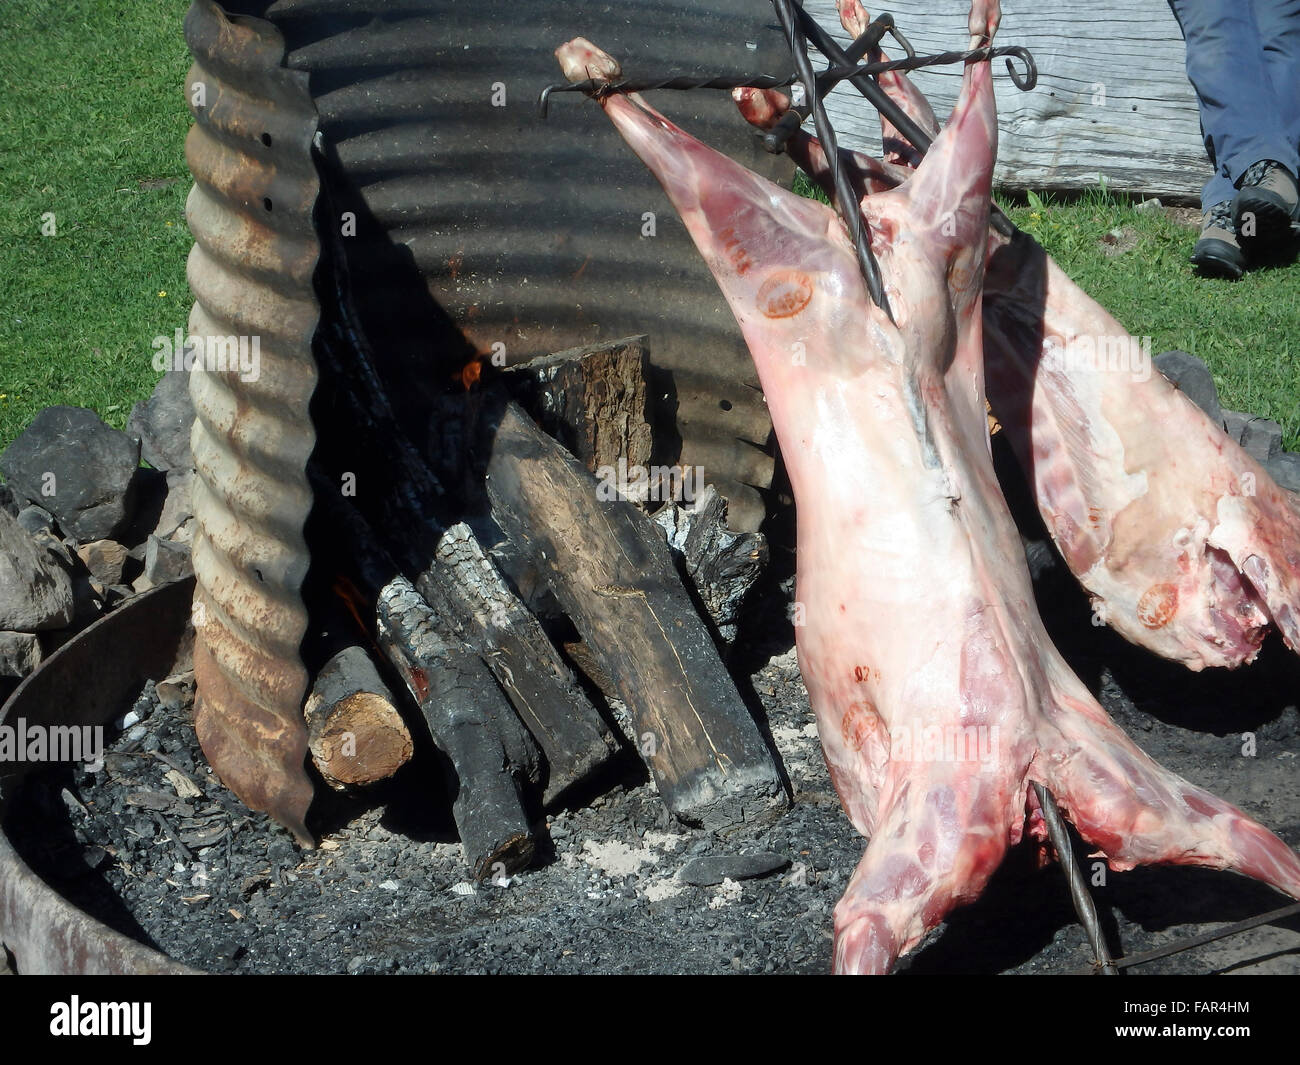 Whole lamb on skewer roasting over open flames in bbq pit. Stock Photo